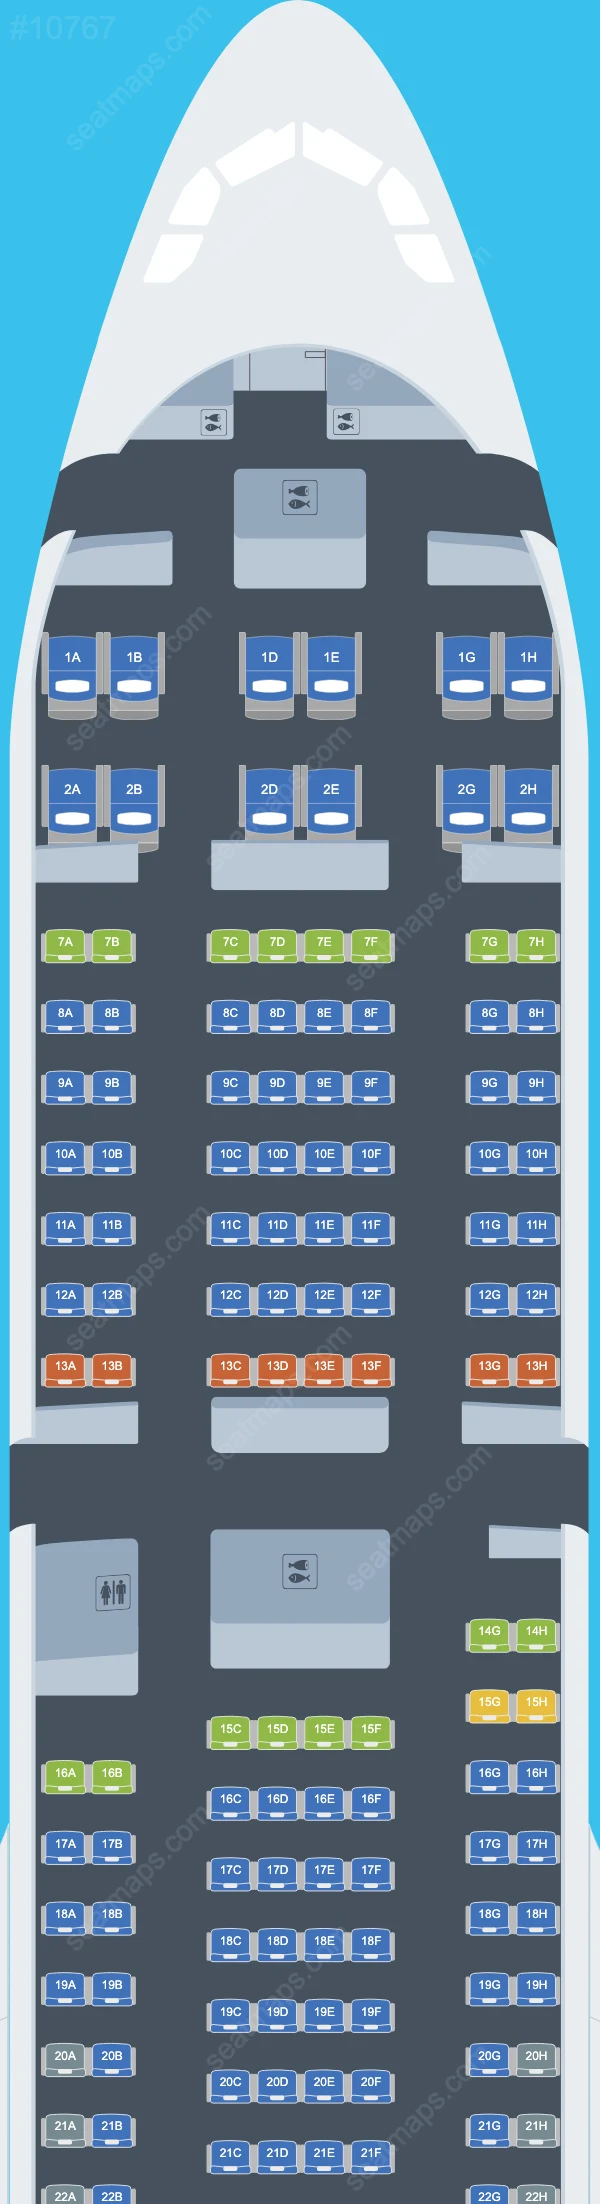 T'way Air Airbus A330-300 seatmap mobile preview